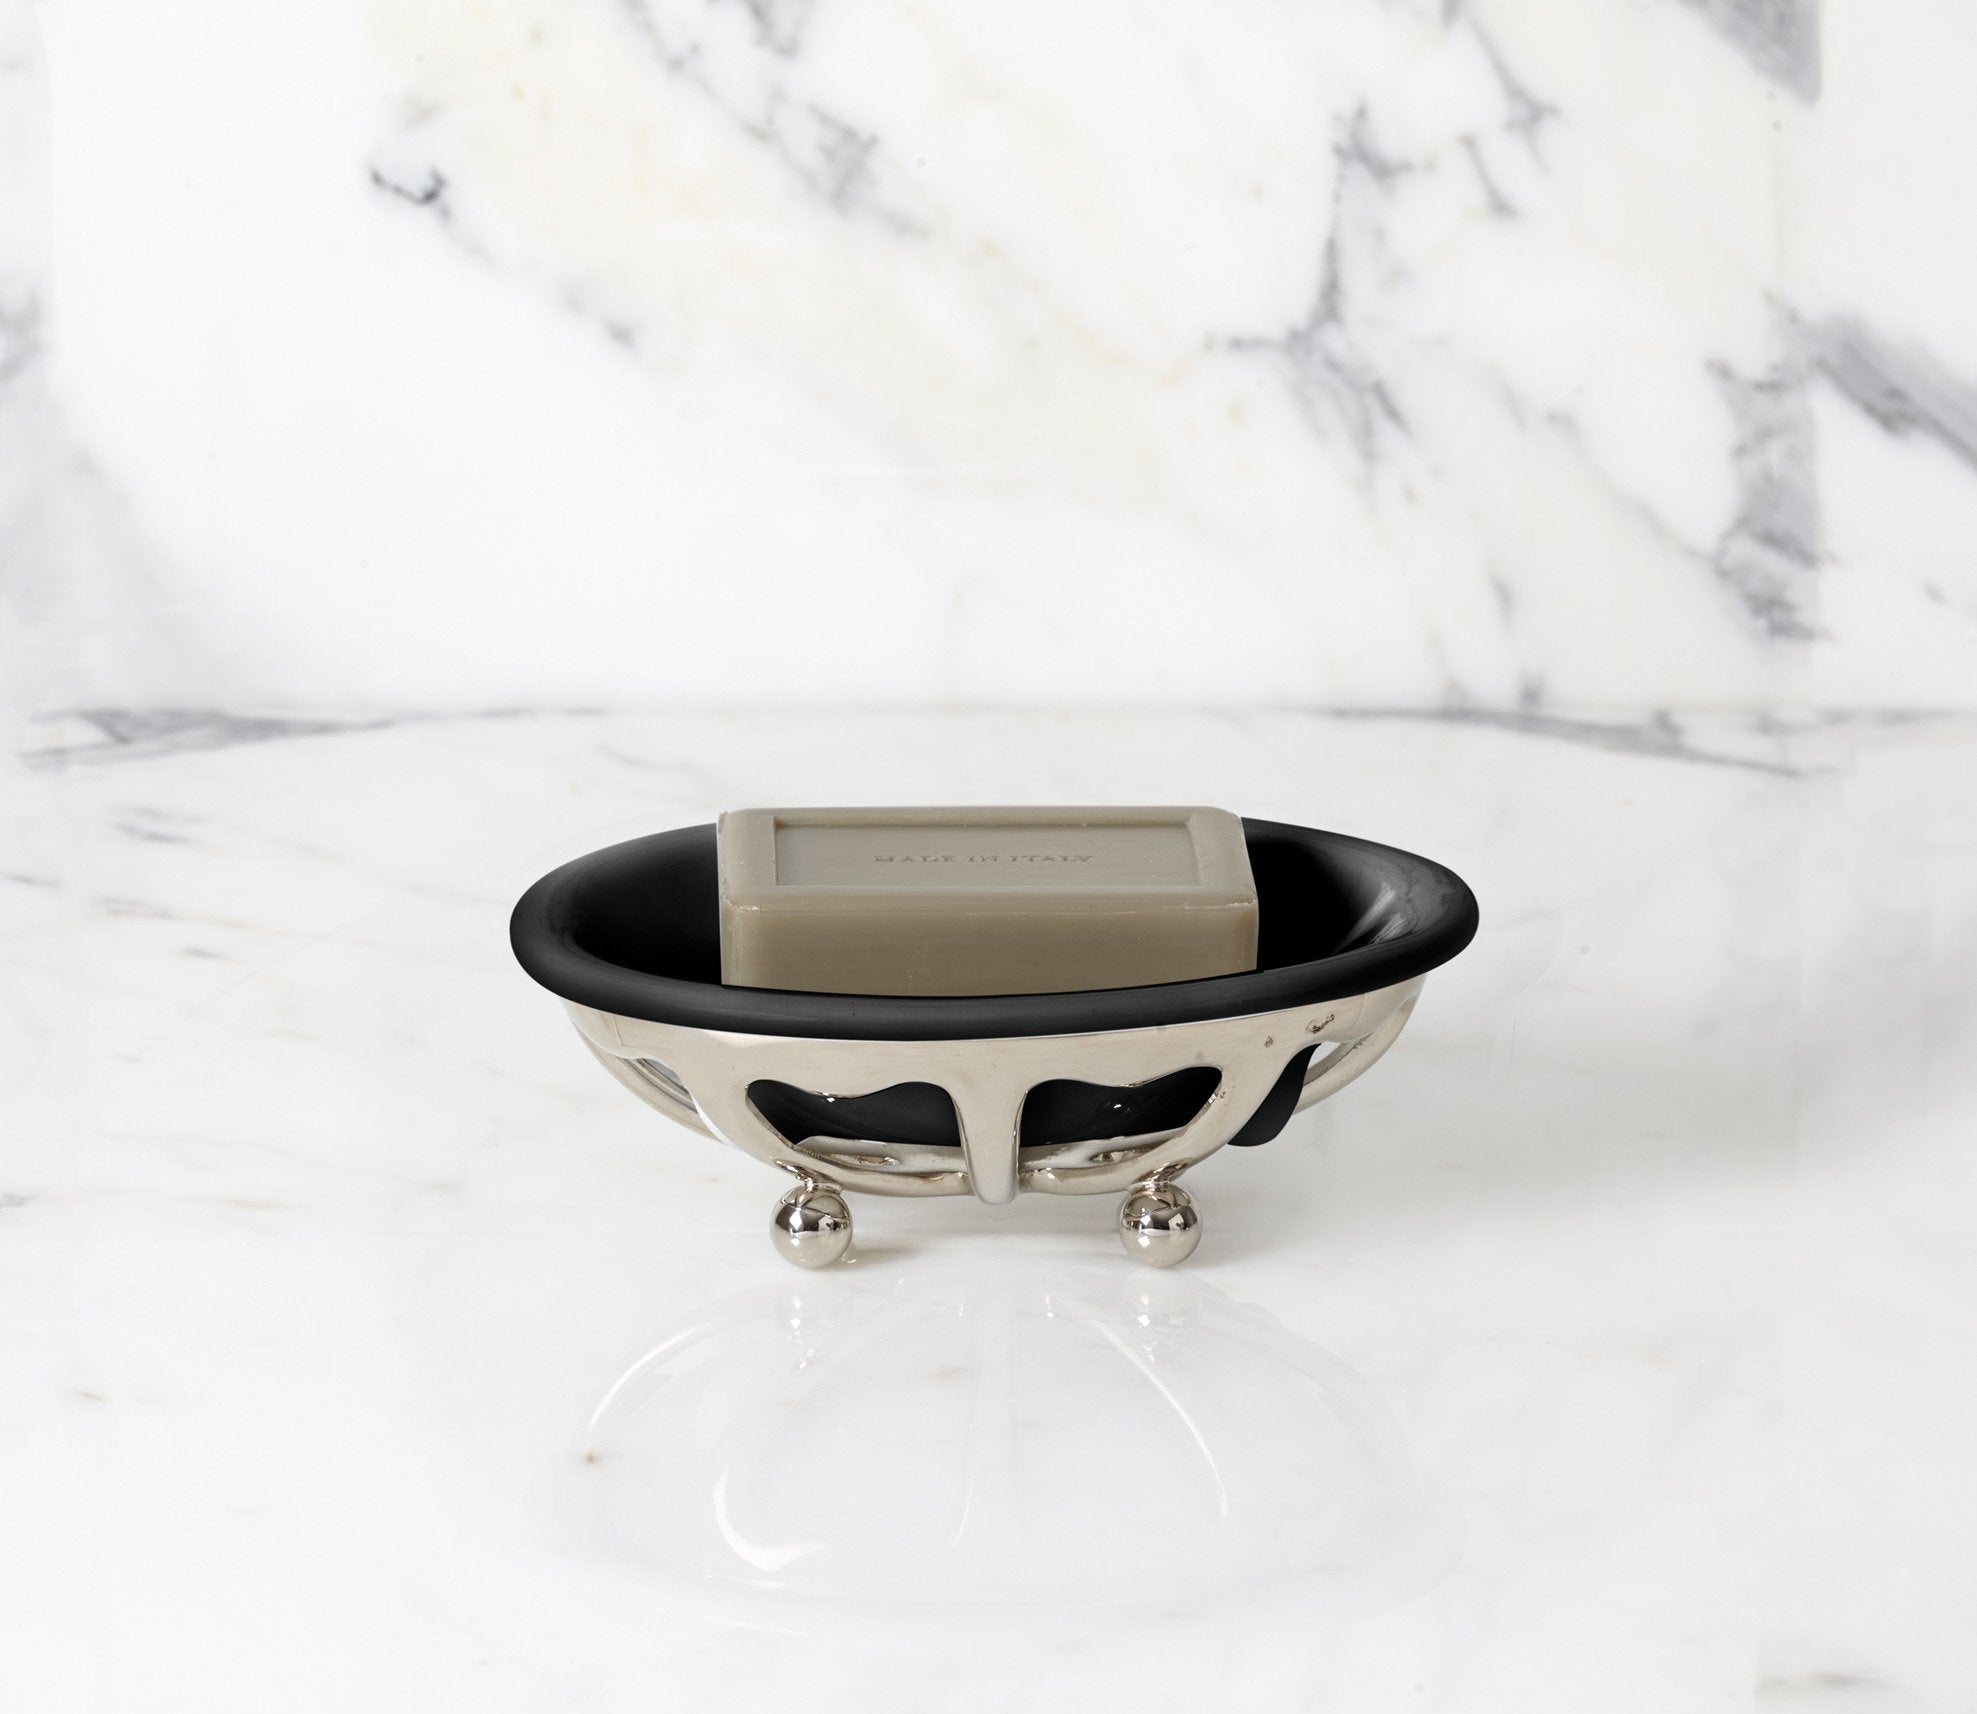 Classic Soap Dish with Black Porcelain Product Image 1